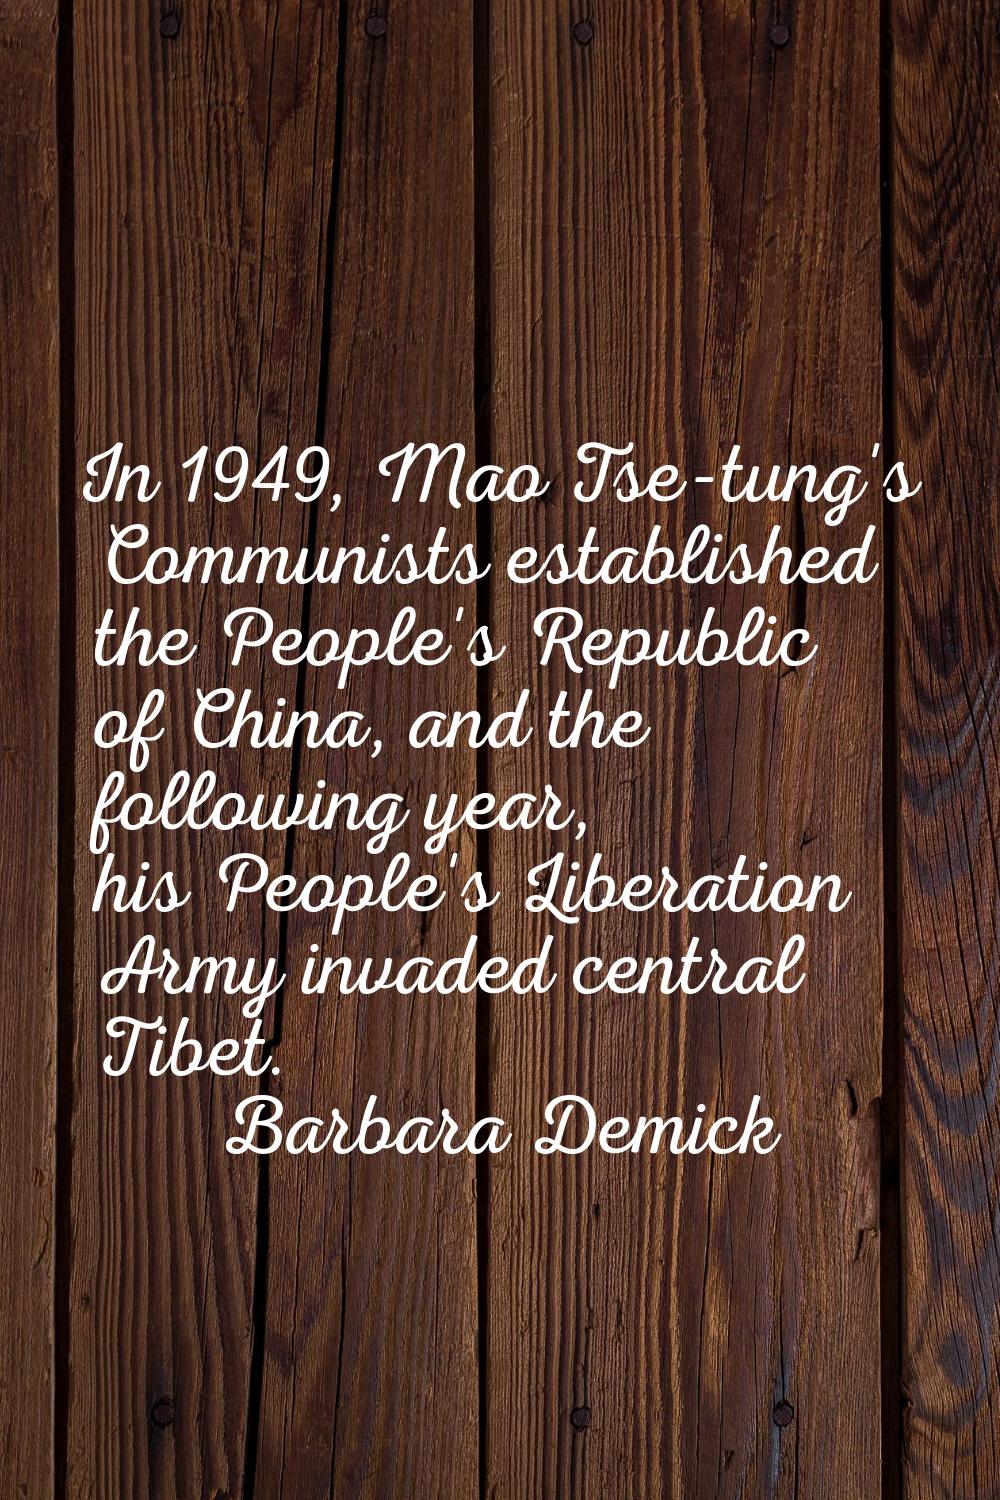 In 1949, Mao Tse-tung's Communists established the People's Republic of China, and the following ye